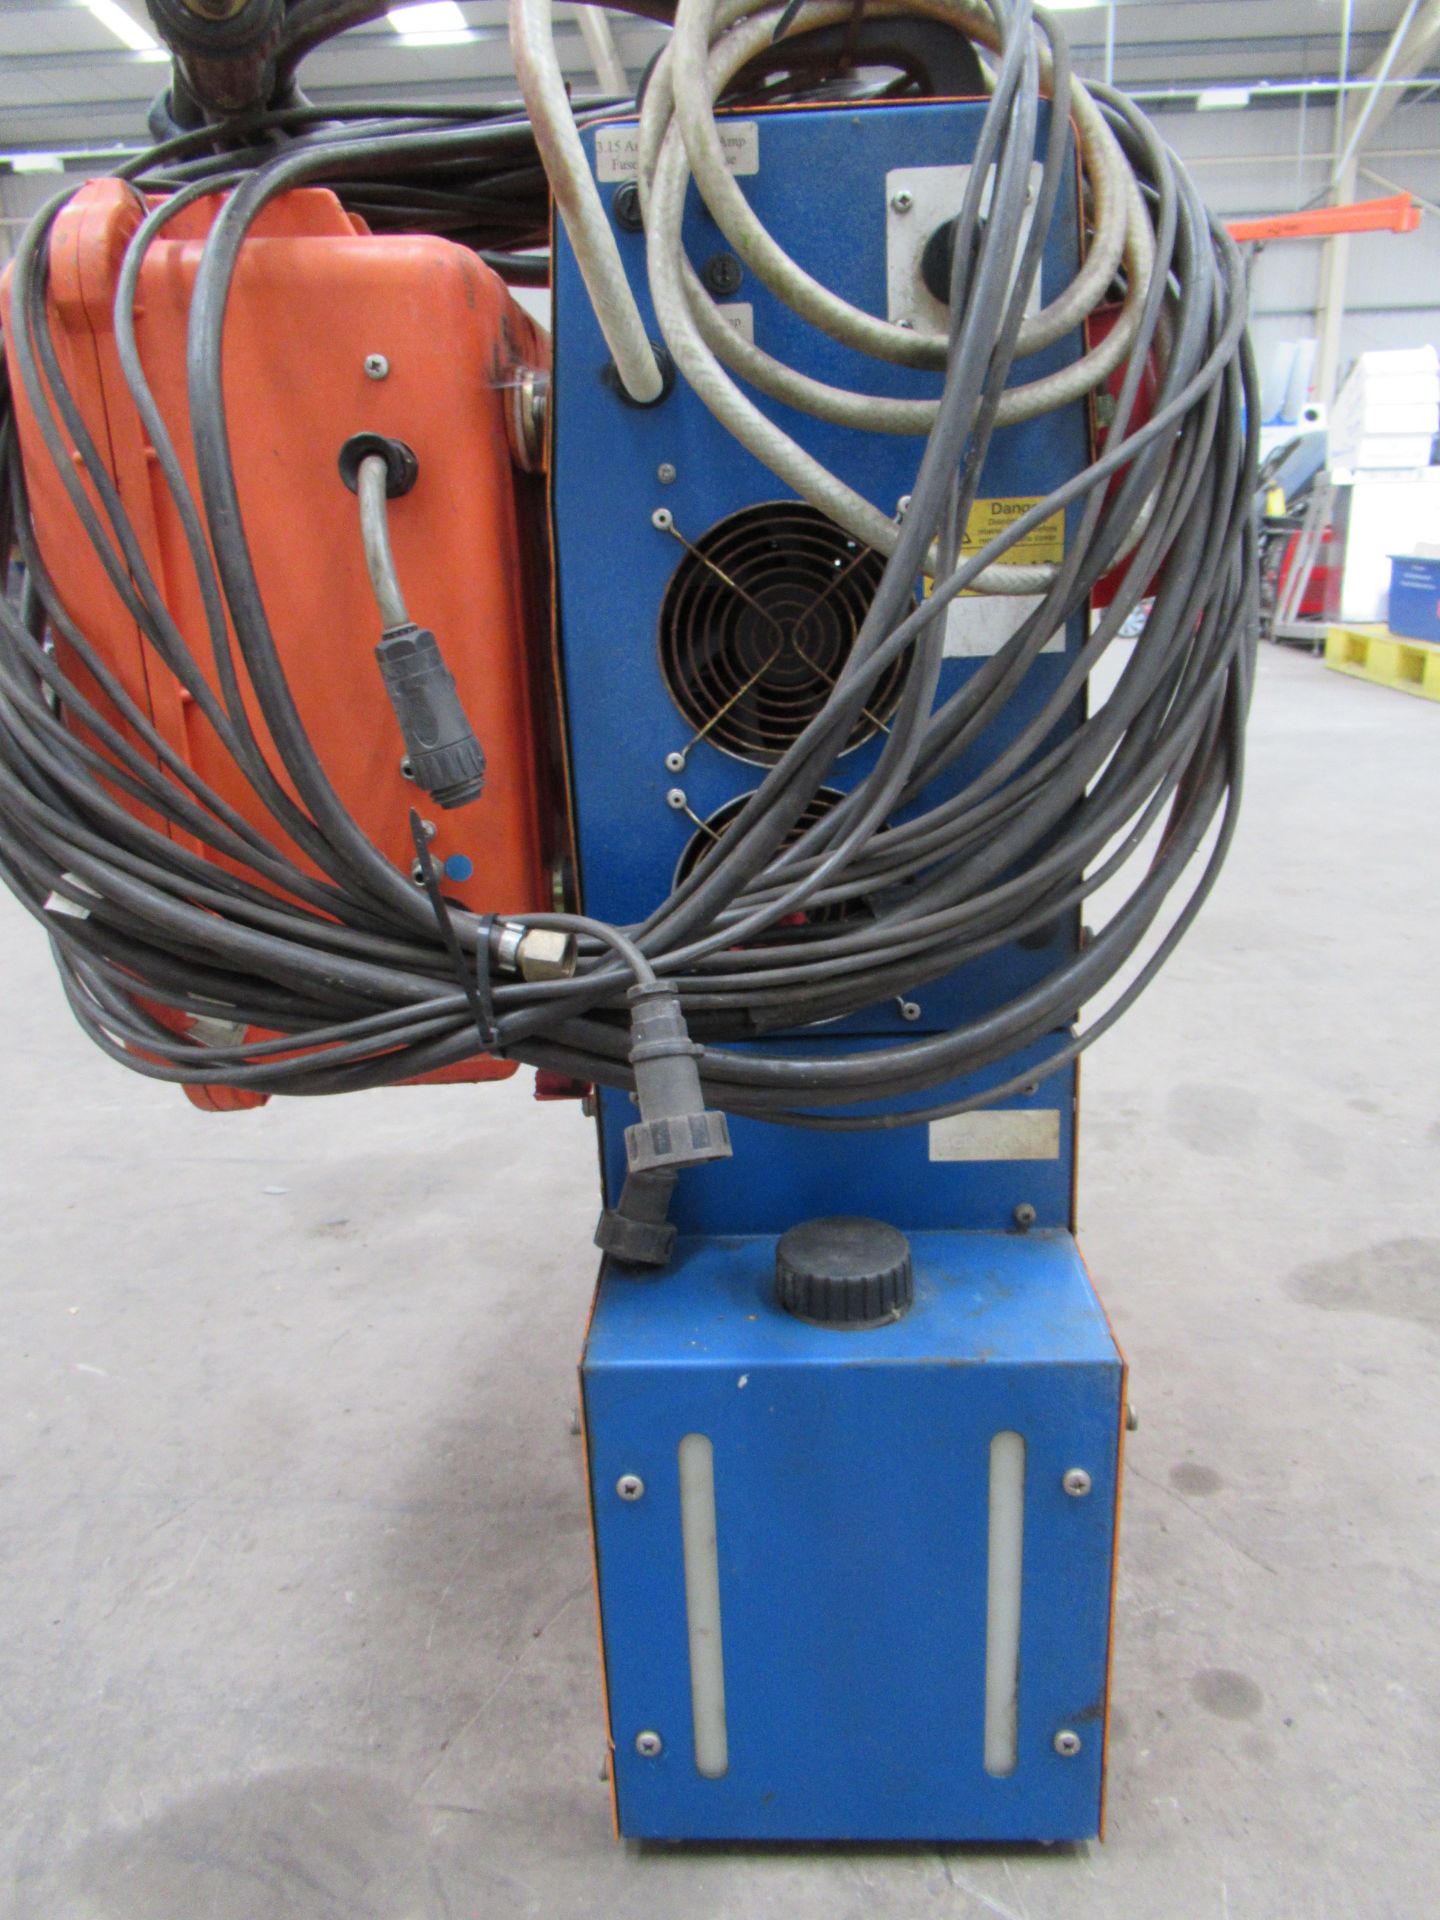 Newarc R4000 MiG welder with water cooler and Newarc WFU12RD wire feed with torch and leads - Image 3 of 8